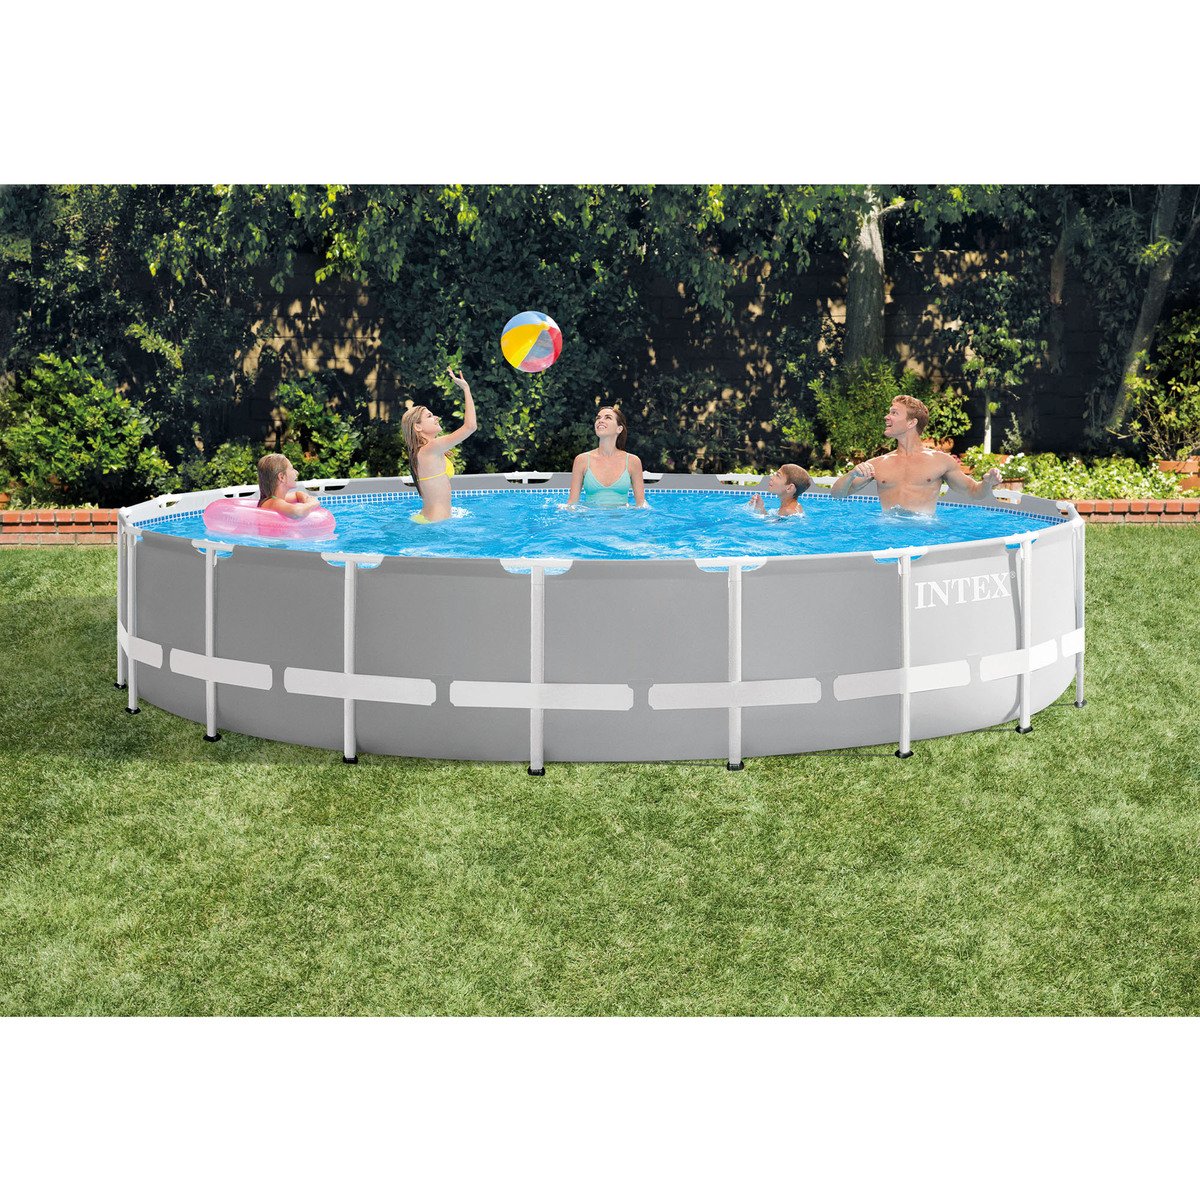 Intex Prism Frame Round Above Ground Pool  26756 20Ft